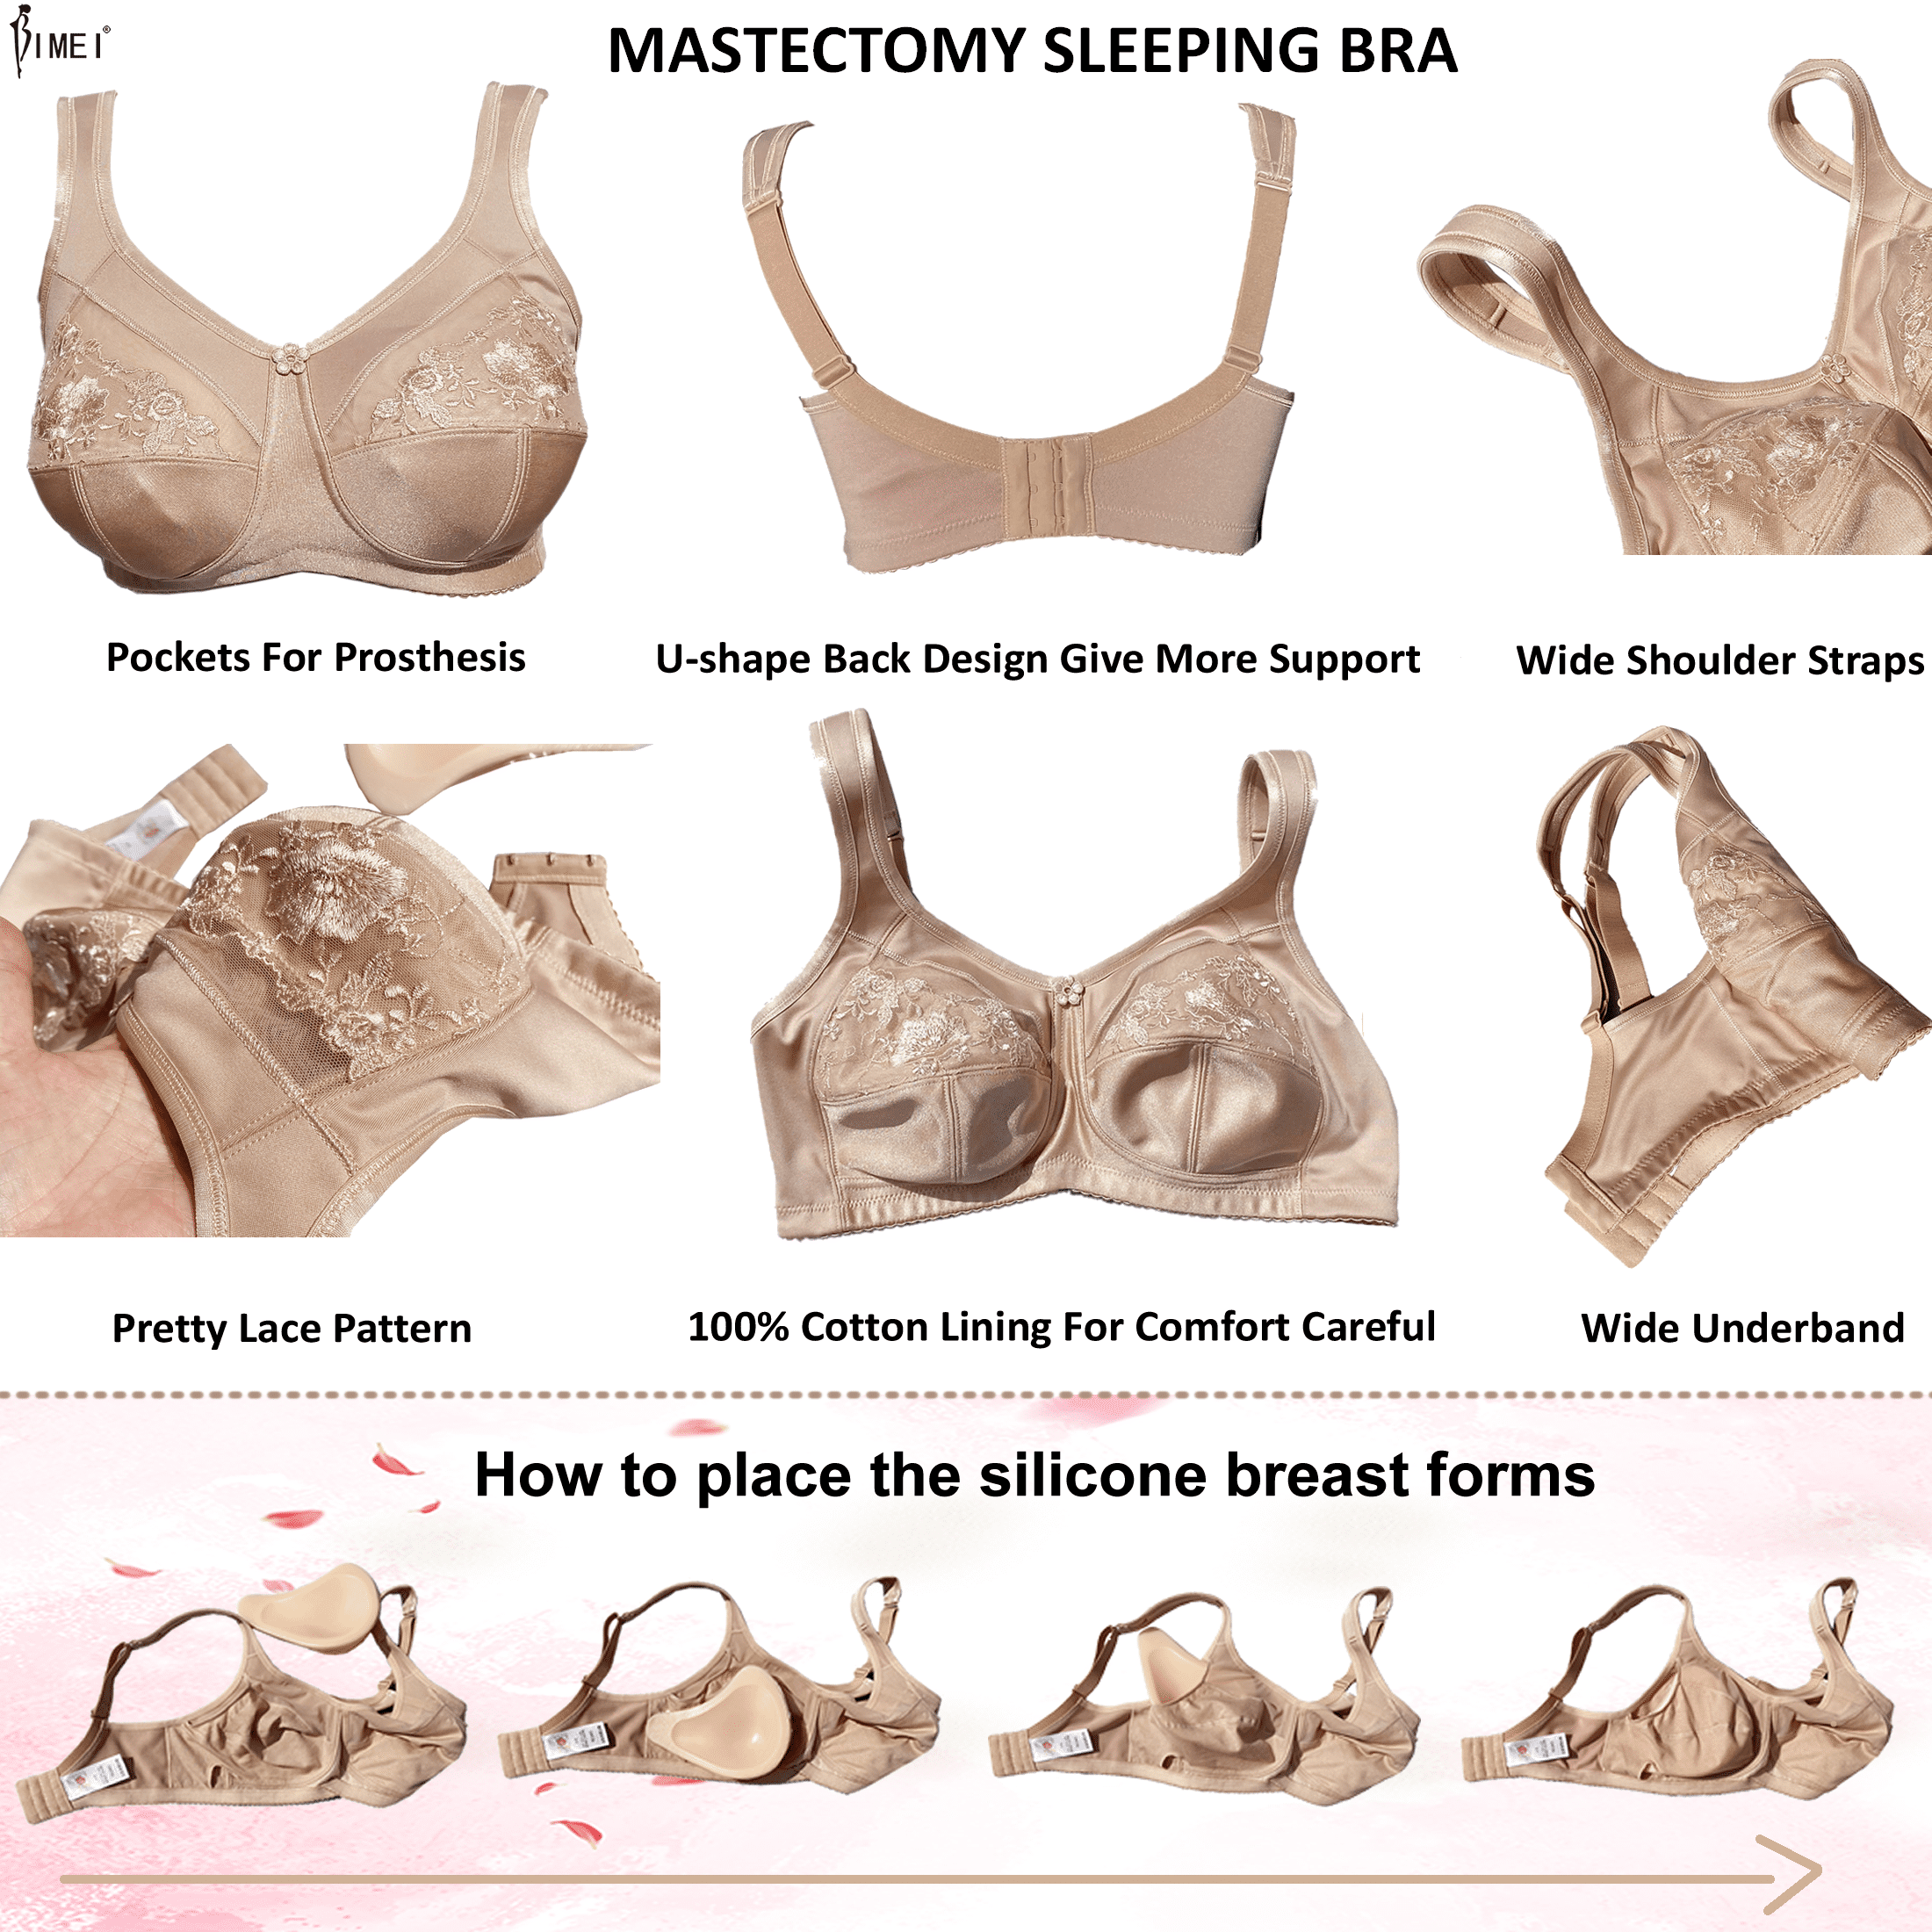 BIMEI Women's Mastectomy Bra Pockets Wireless Post-Surgery Invisible Pockets  for Breast Forms Flower Embroidery Everyday Bra Sleep Bra 2118,Beige, 42B 